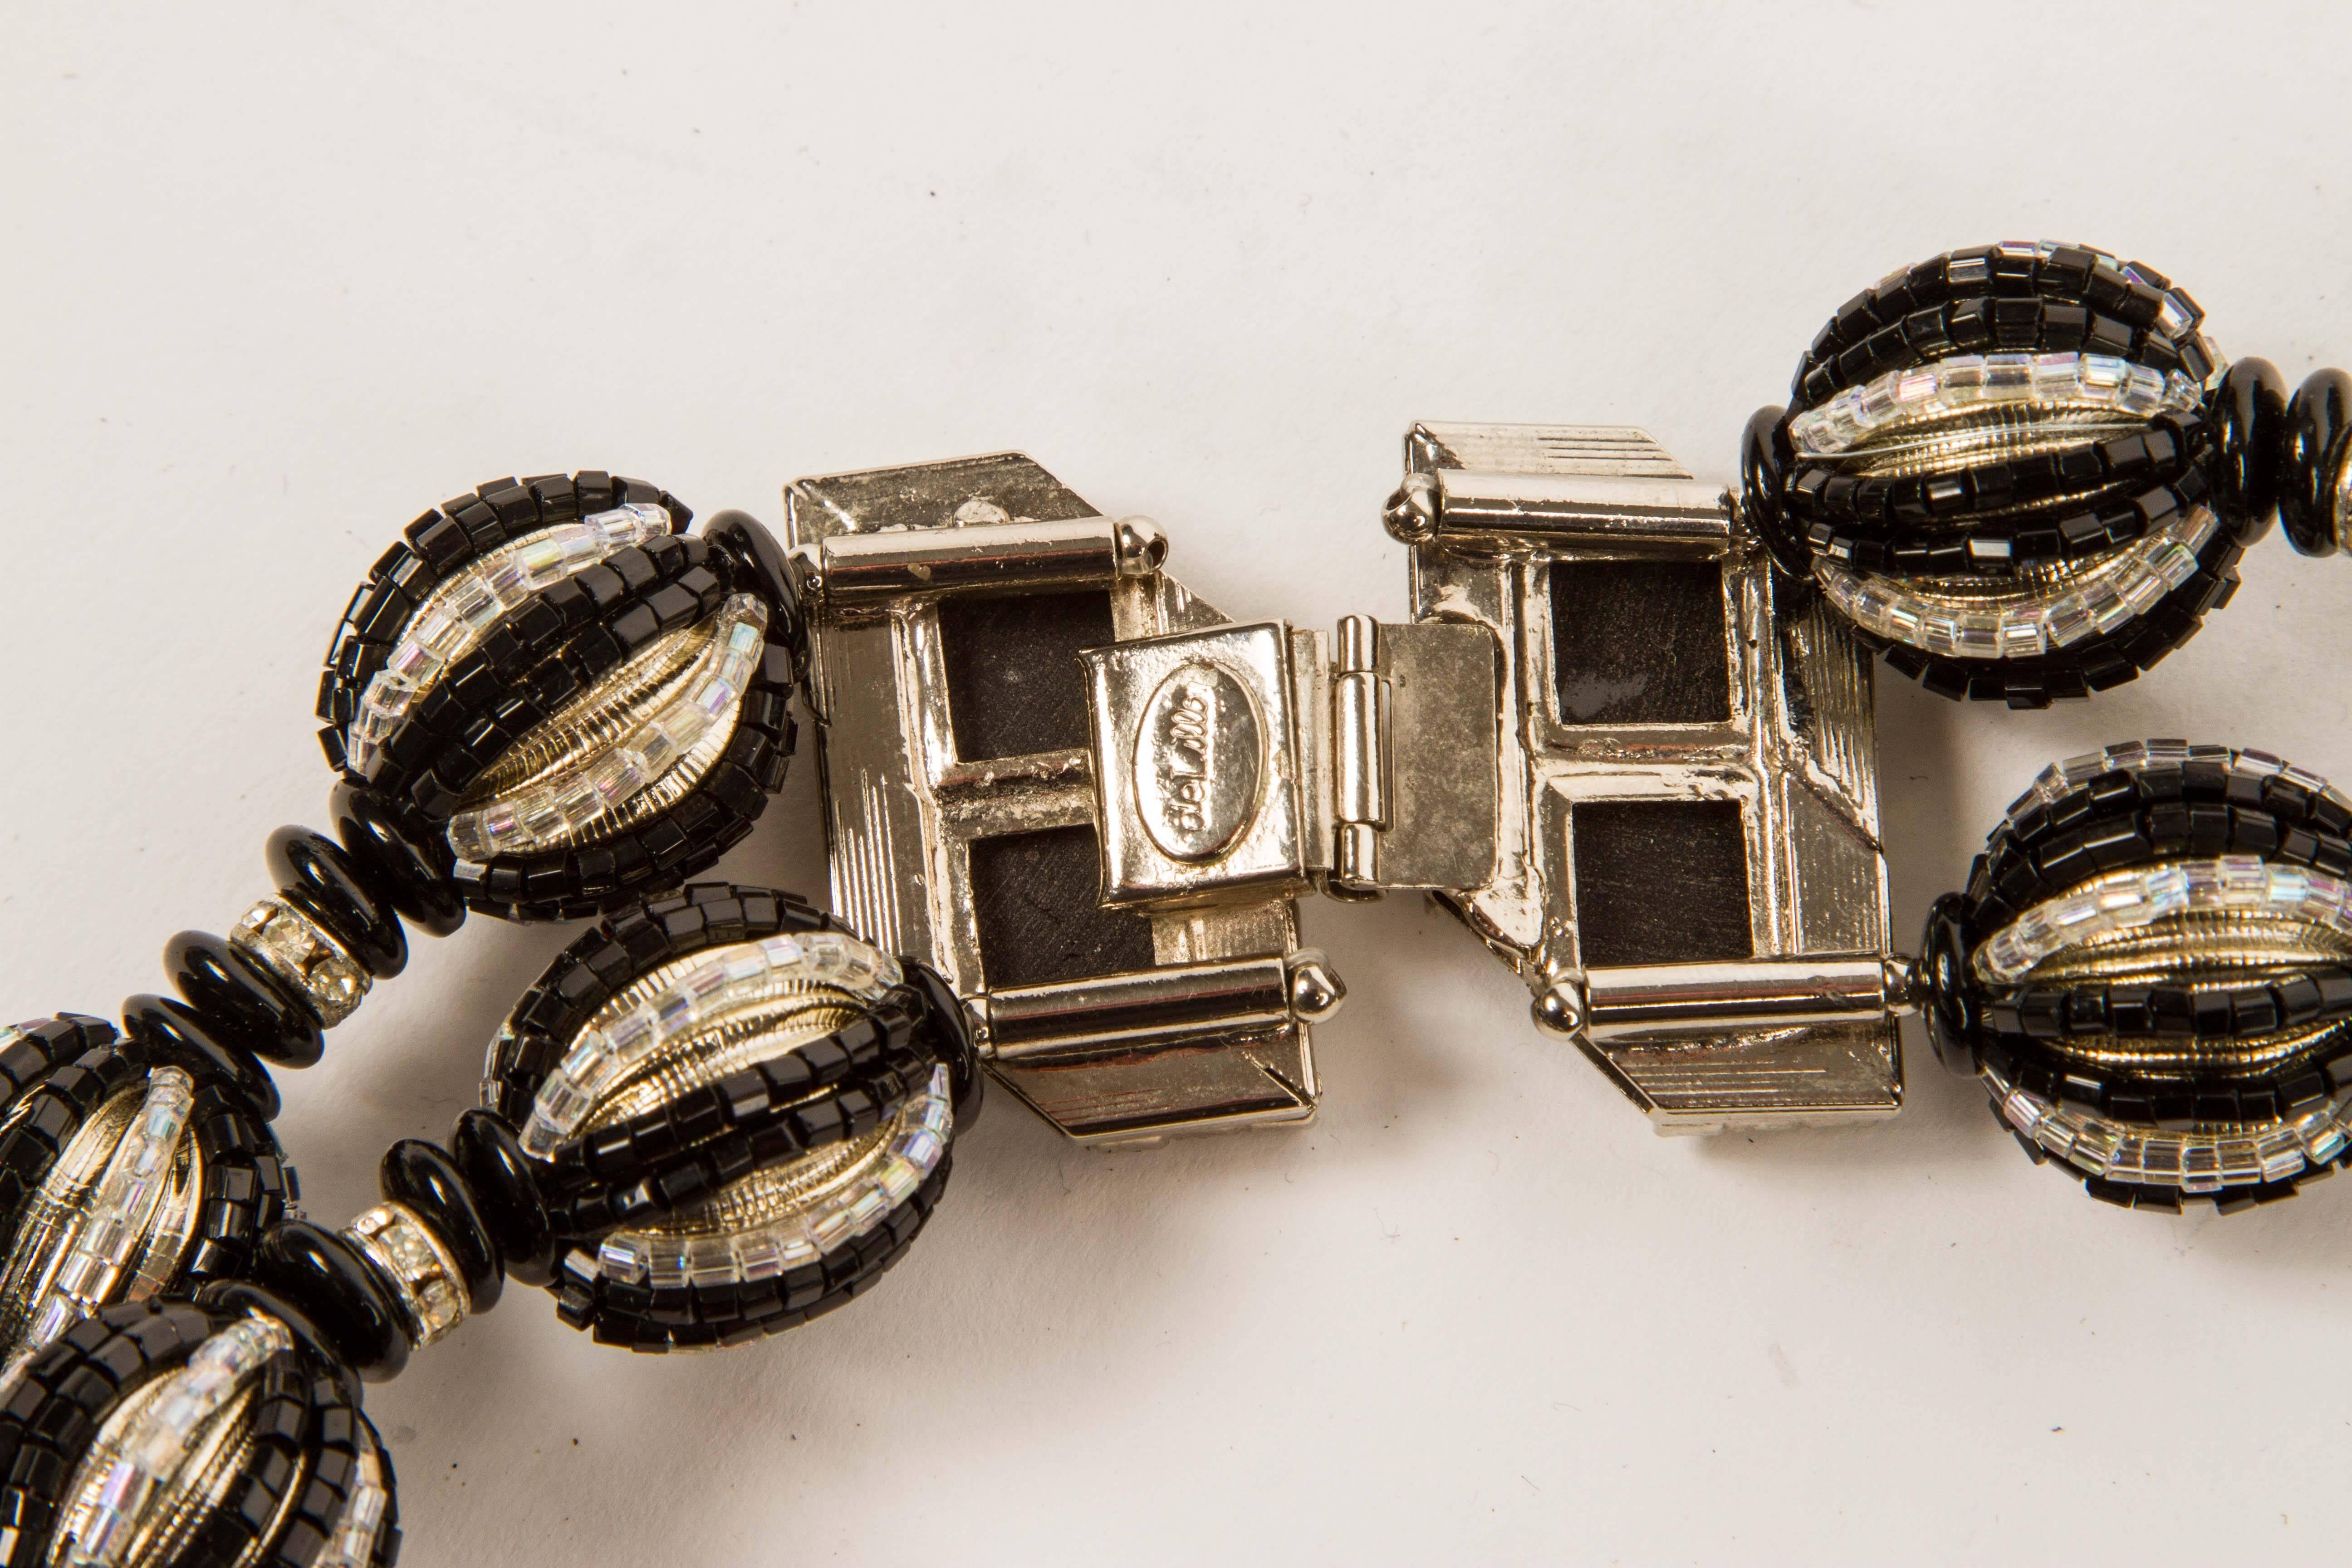 An Art Deco Inspired Necklace by William DeLillo In Excellent Condition For Sale In Palm Desert, CA